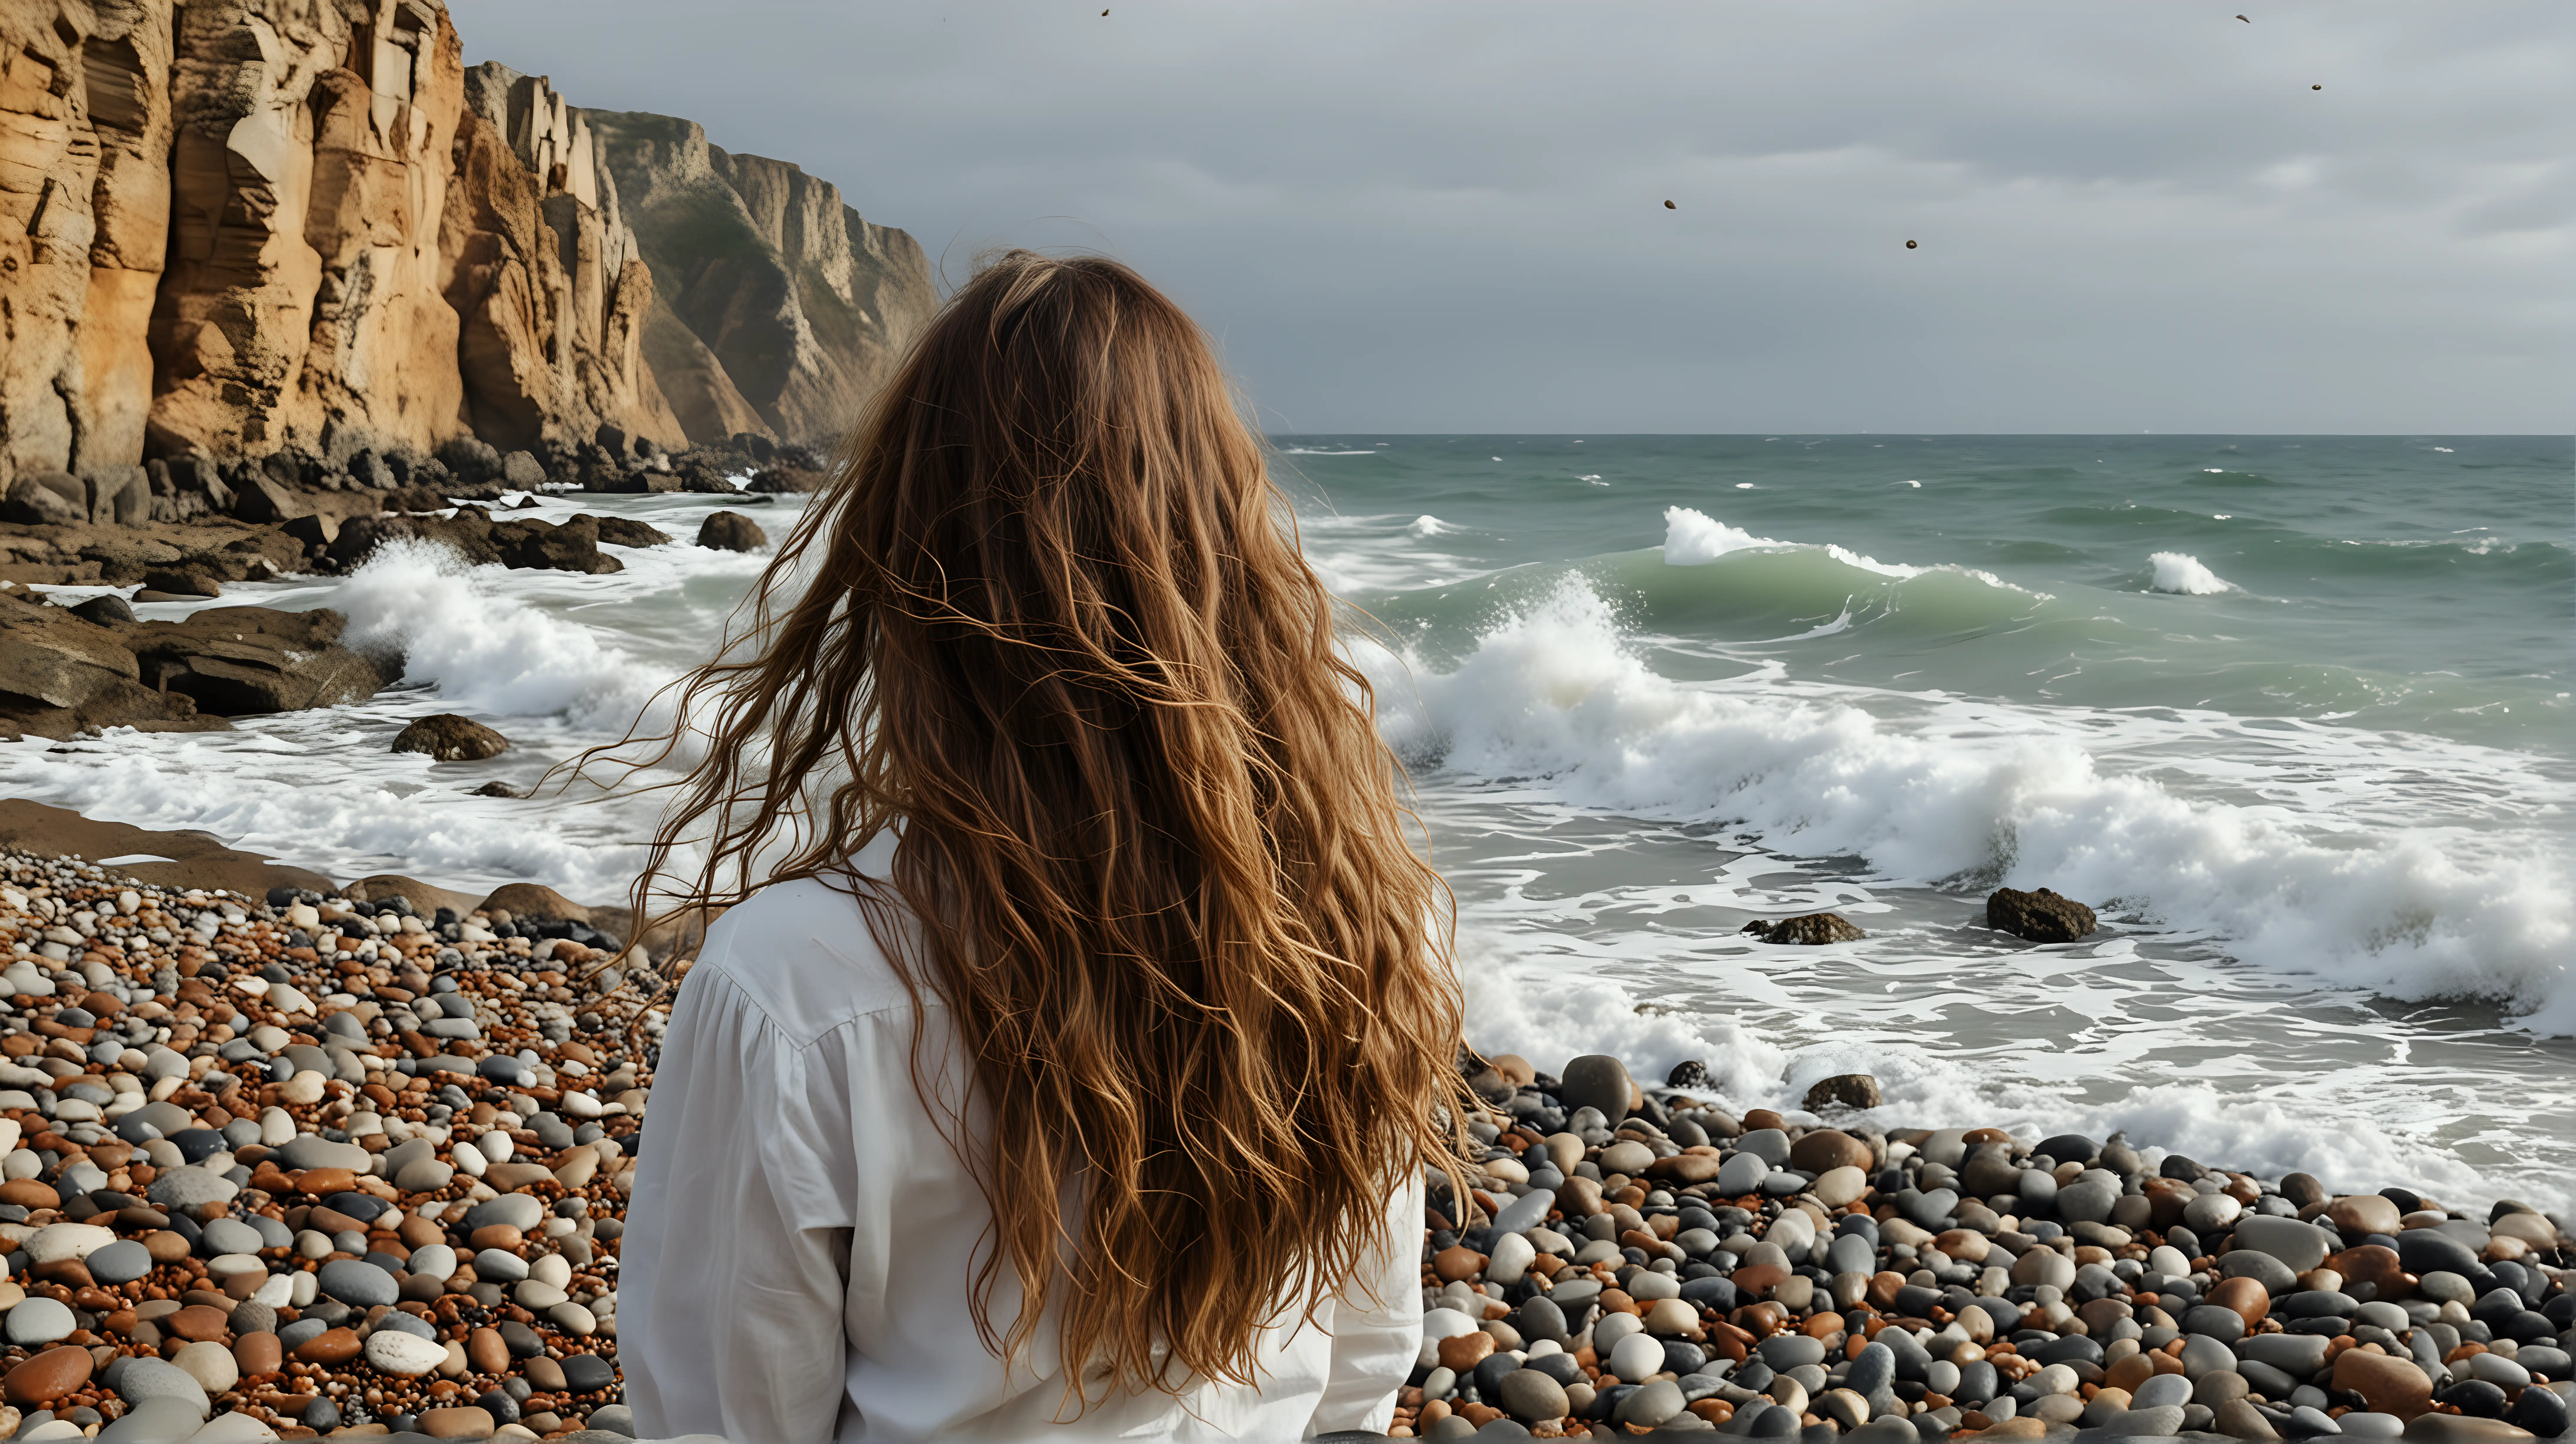 Woman with Long Hair Contemplating the Sea on a Rocky Beach